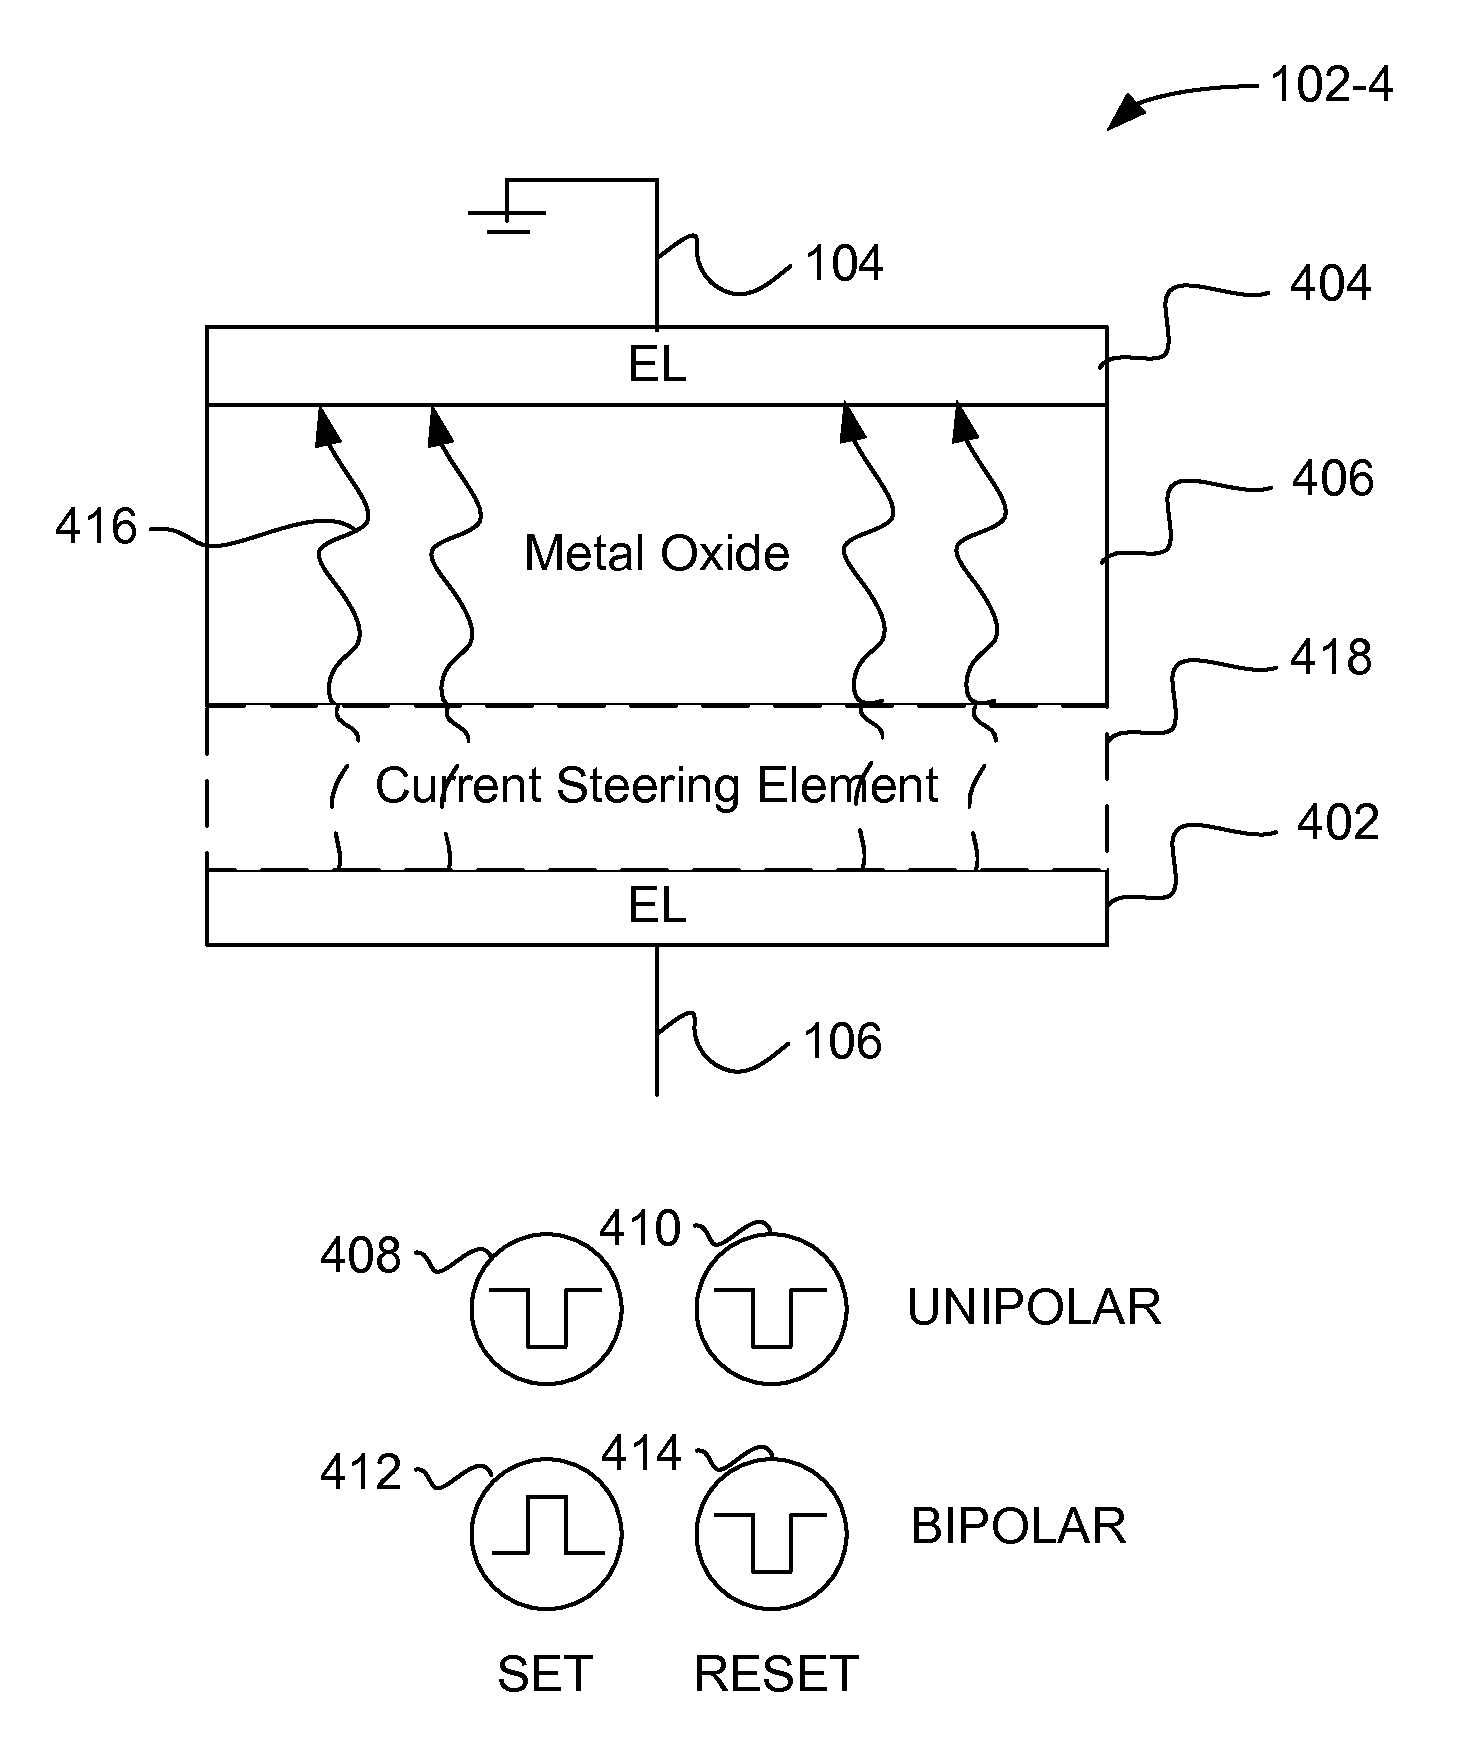 Ald processing techniques for forming non-volatile resistive-switching memories